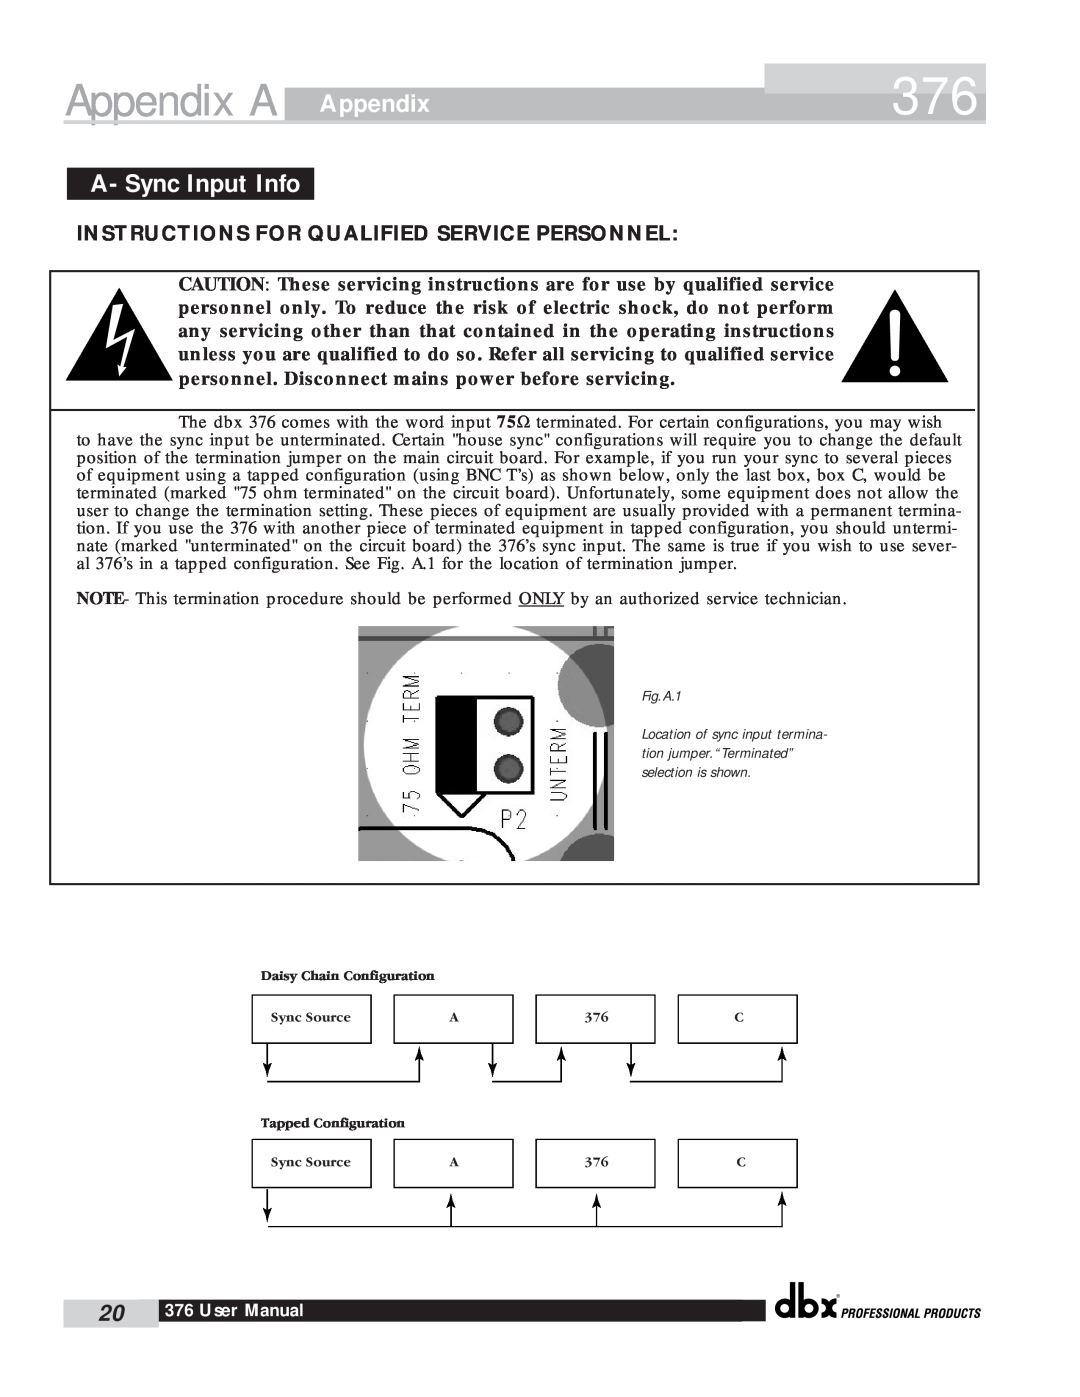 dbx Pro 376 user manual Appendix A, A- Sync Input Info, Instructions For Qualified Service Personnel 